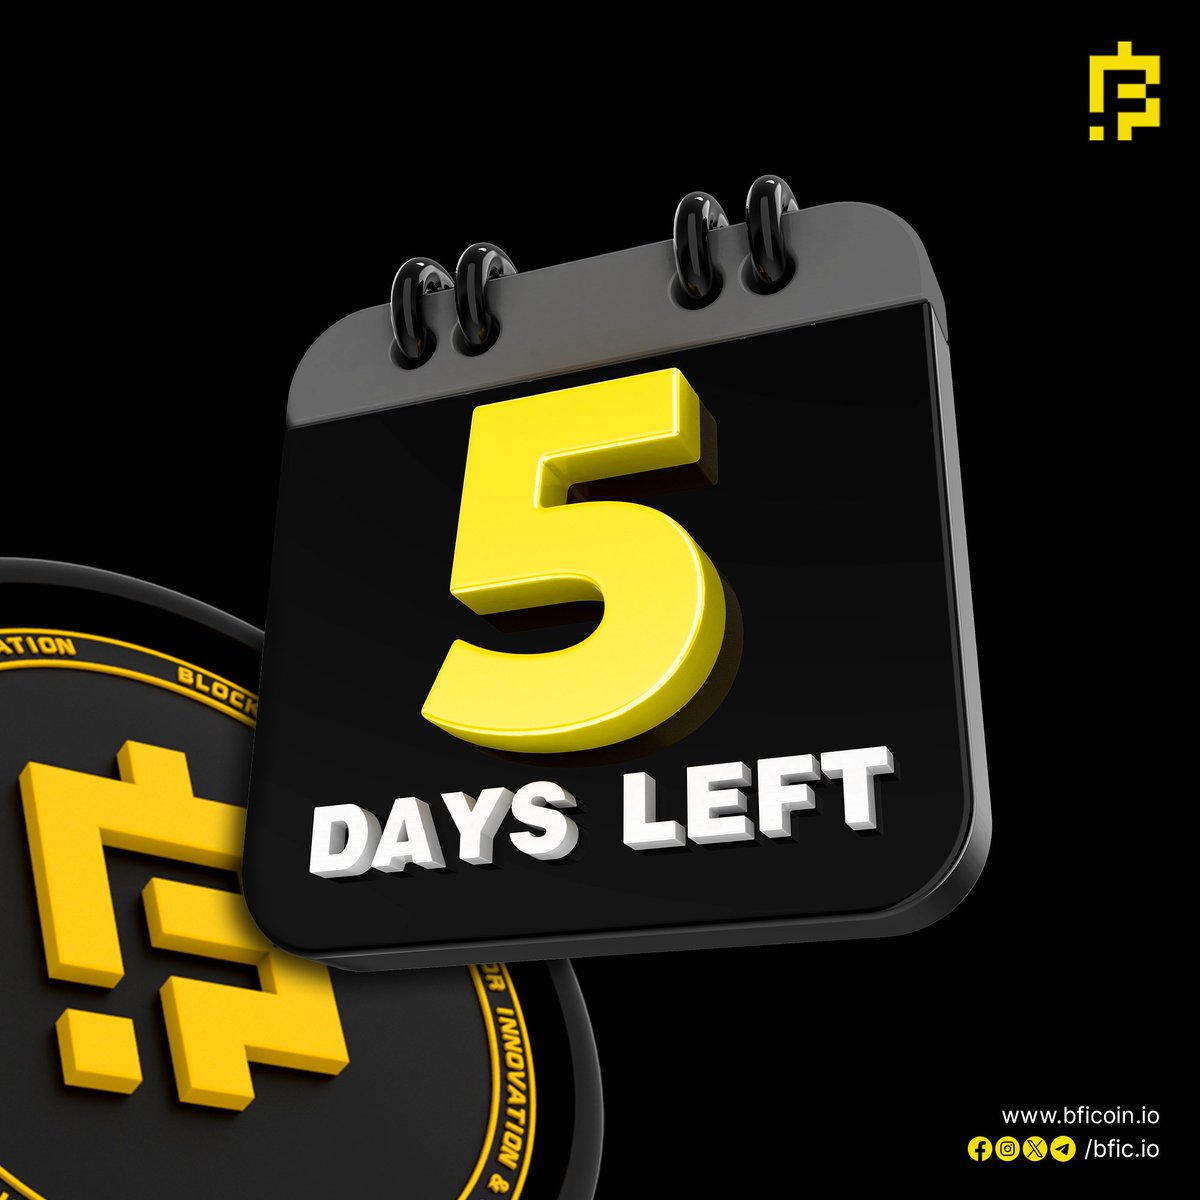 Tick-tock, tick-tock! Only 5 days remaining until April 15th, when the crypto universe will experience a groundbreaking shift! Don't miss out on being part of this historic moment! ⏰🌐 . . . #5daysleft #InnovationFactory #BFIC #BULLRUN #BFICToTheMoon #BFIC15thApril